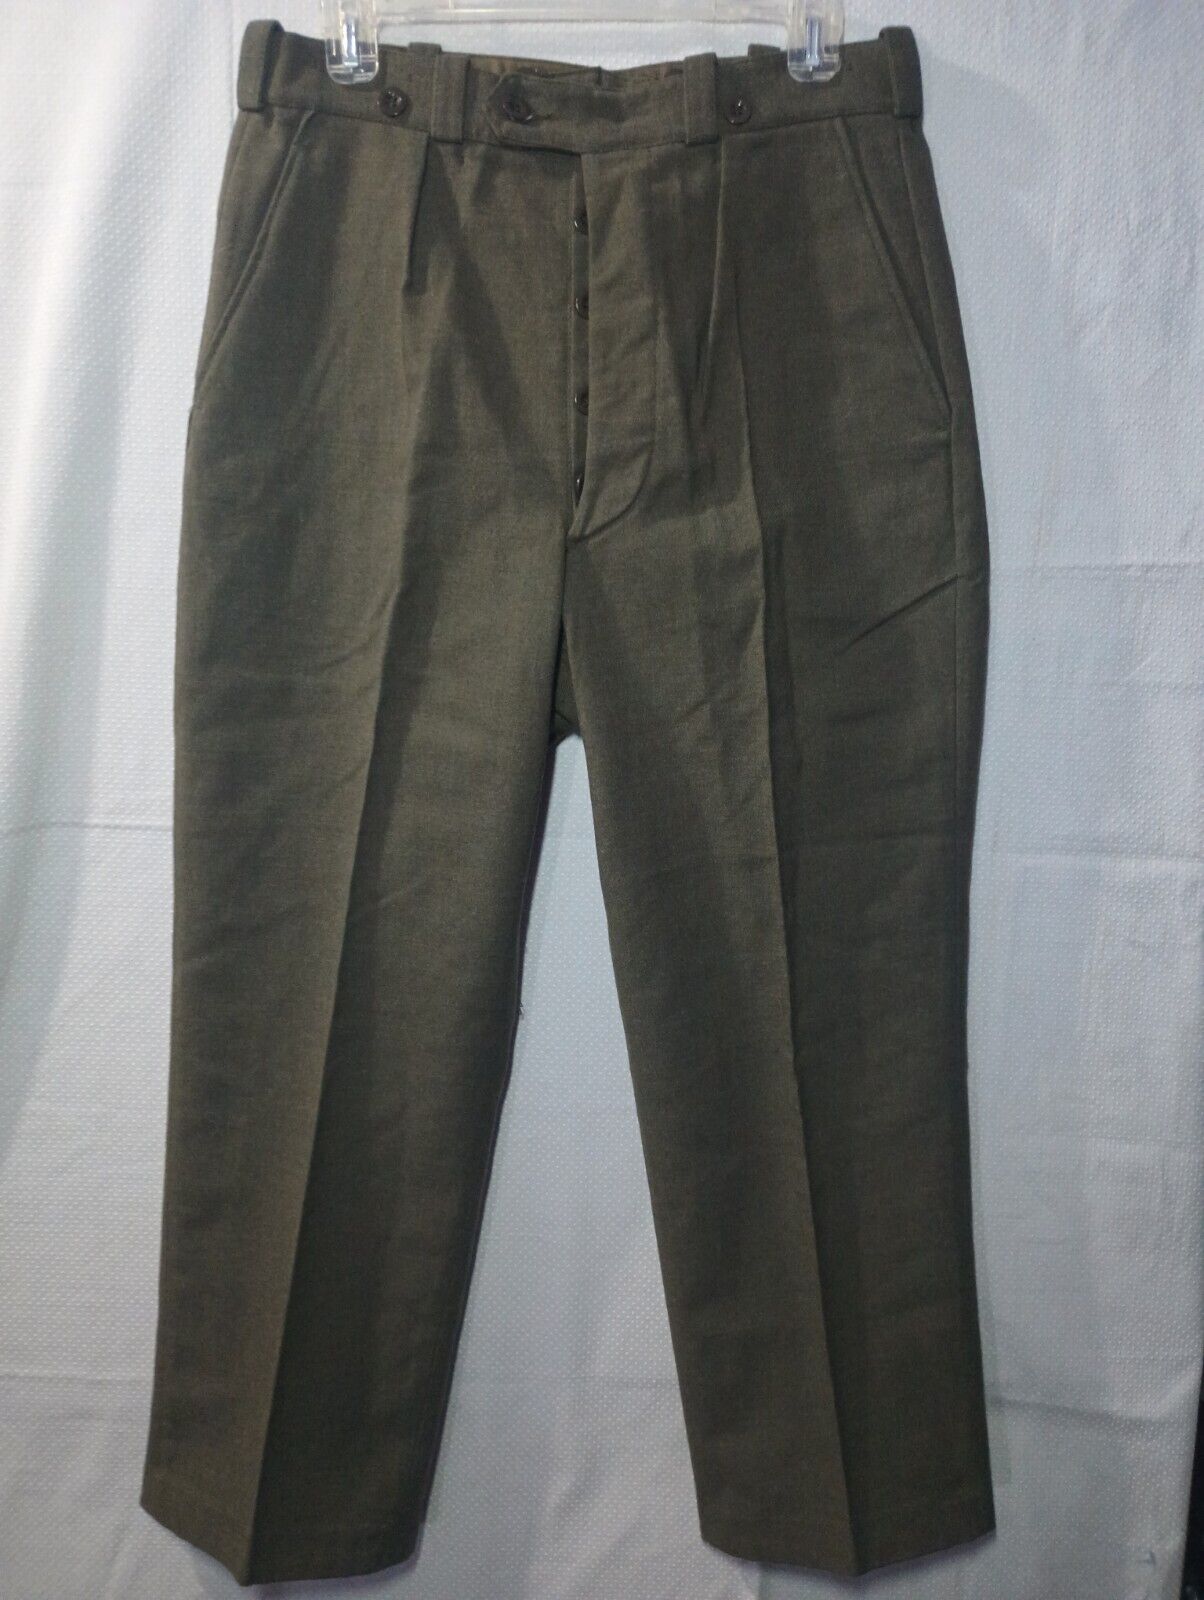 French army trousers 1967 Belgium Begetex P.V.B.A. Nwot New Condition